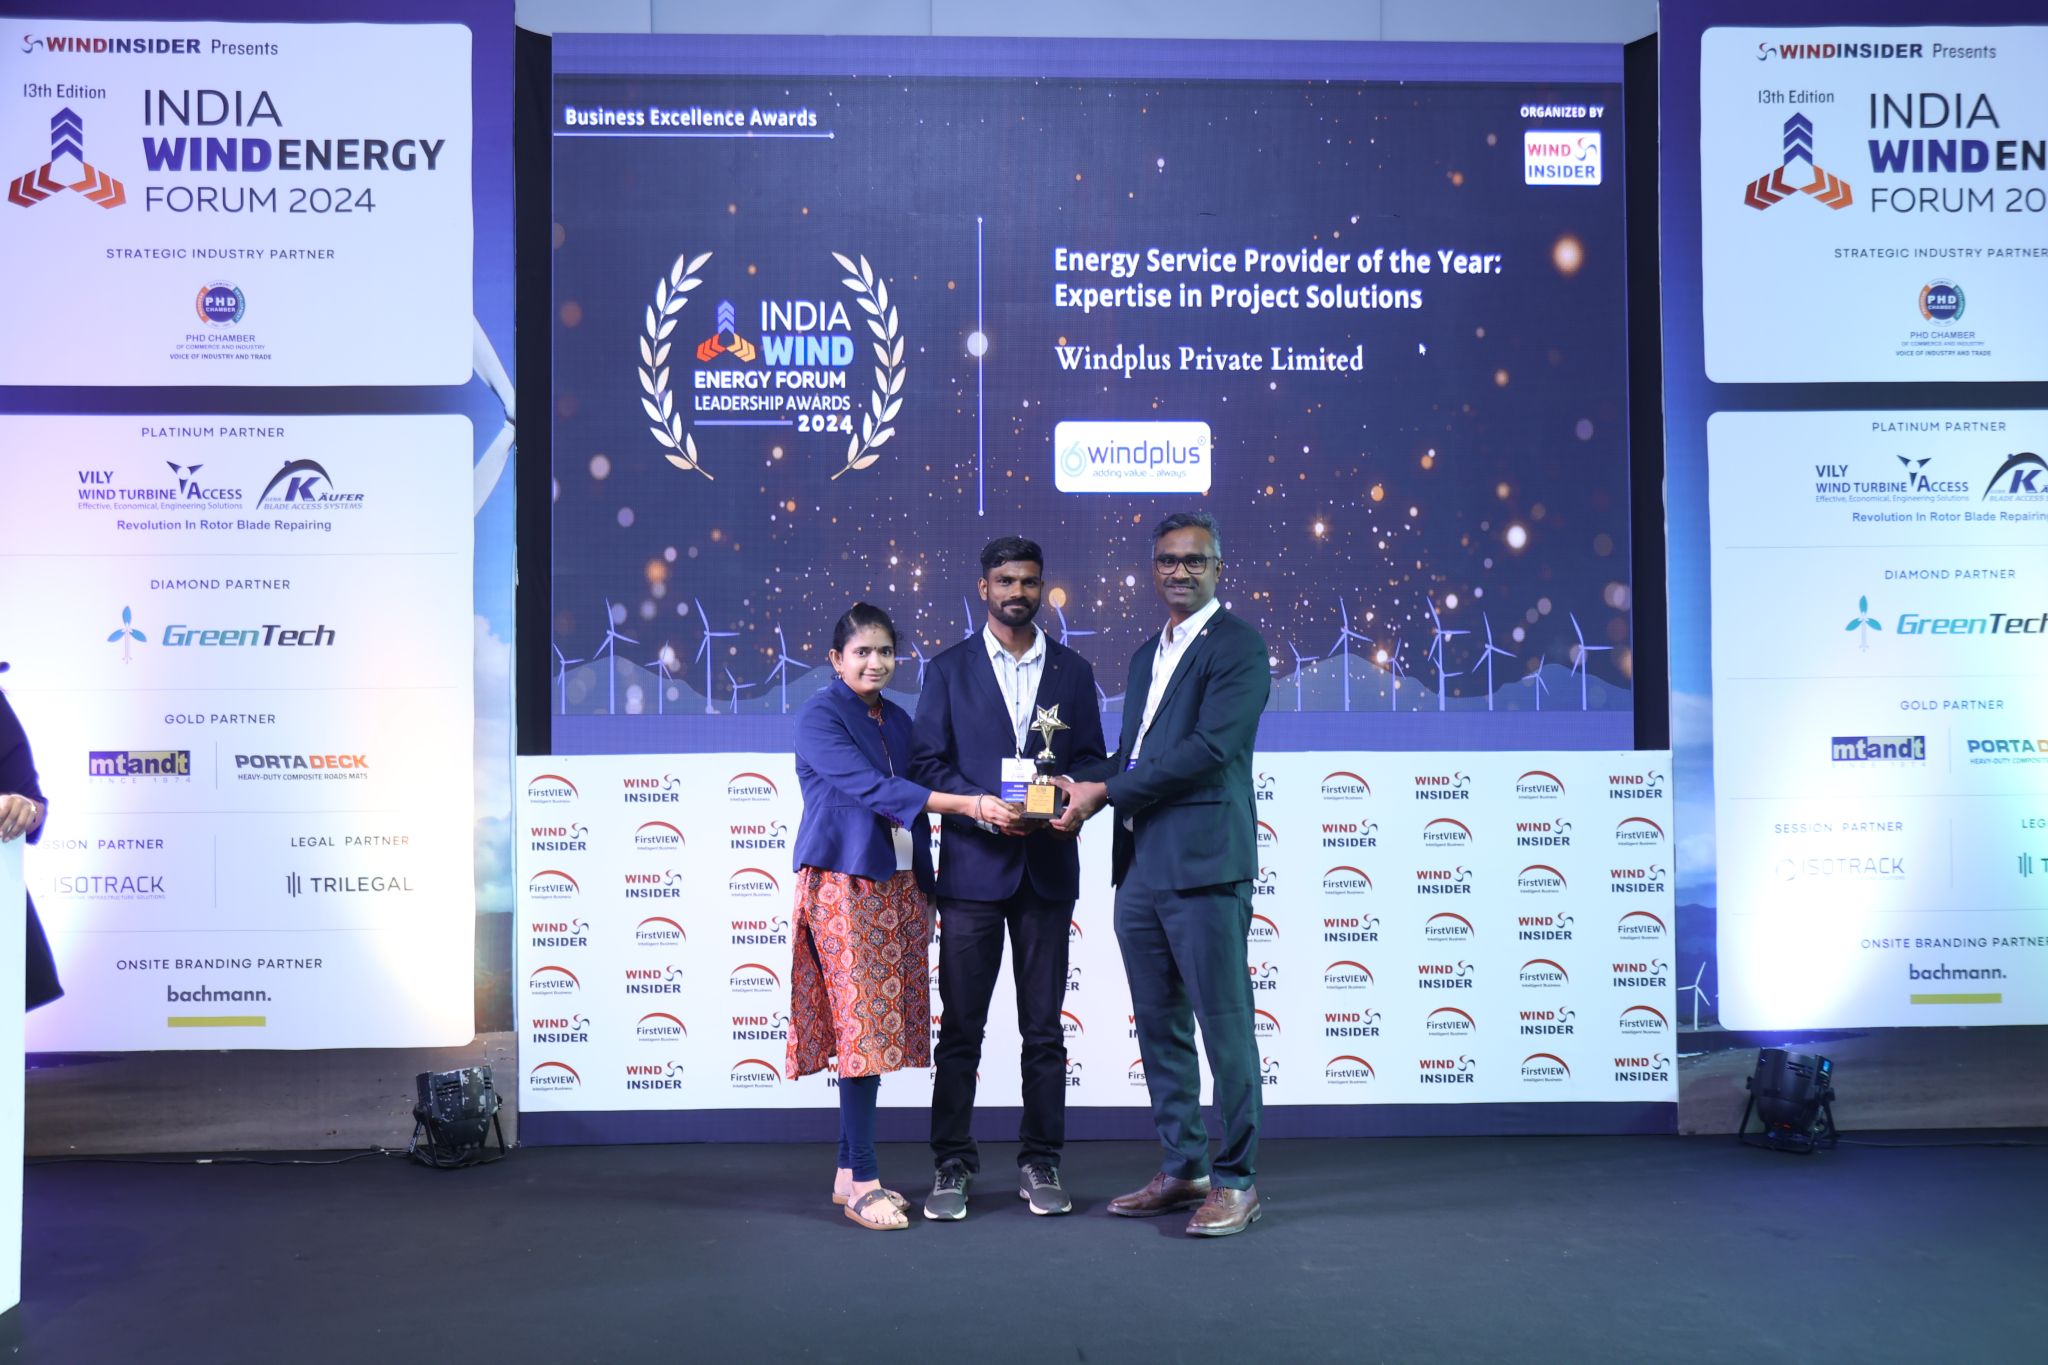 India Wind Energy Forum 2024 - Energy Service Provider Of the Year in under Expertise in Project Solutions Category.